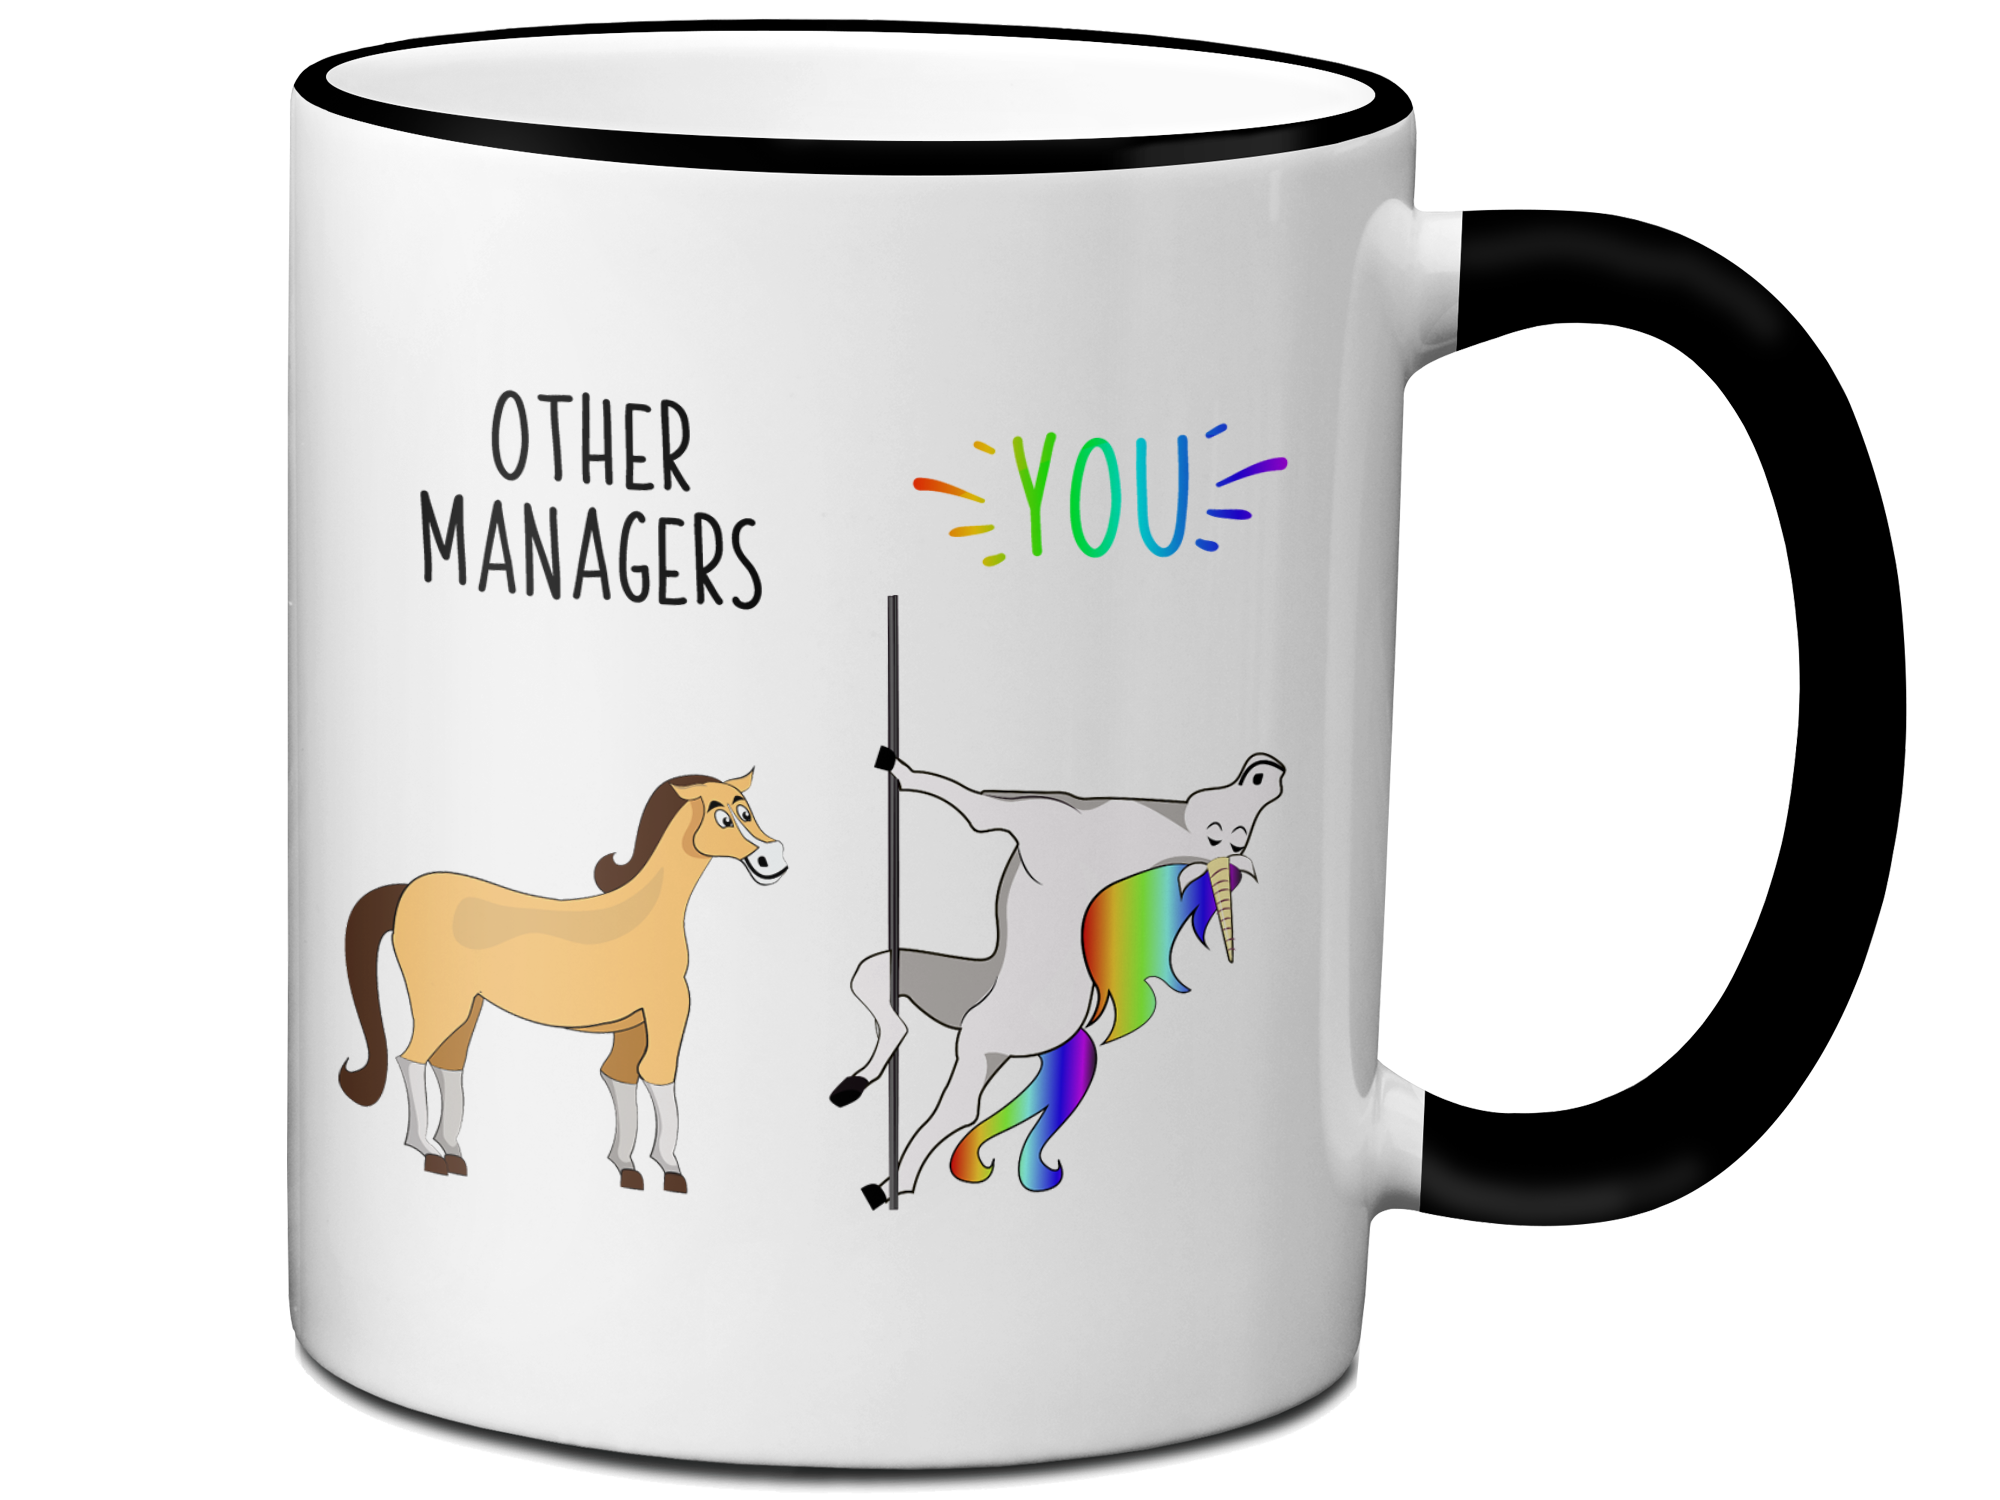 Manager Gifts - Other Managers You Funny Unicorn Coffee Mug - RANSALEX